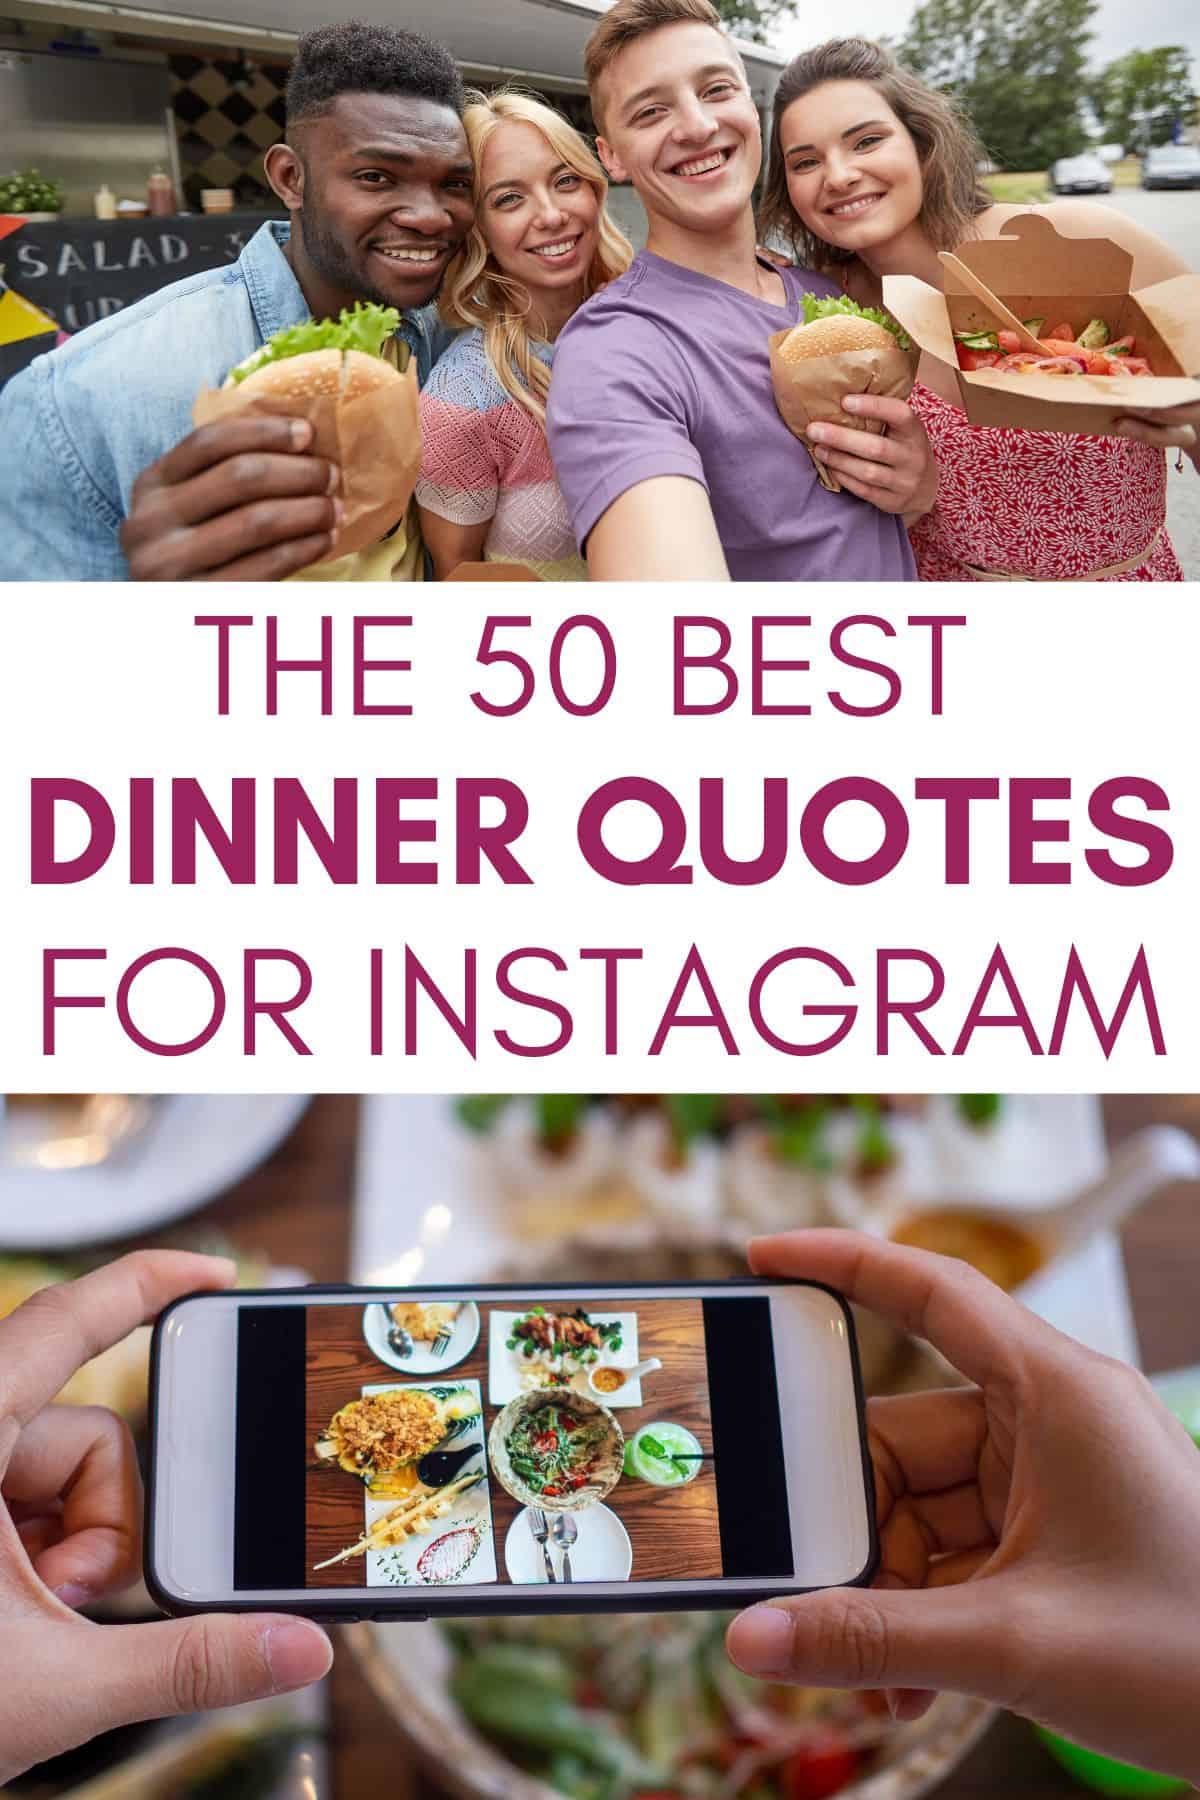 collage of friends taking a selfie together with food and another photo of someone taking a picture of their dinner on the bottom. In the middle of the image there is text overlay that says The 50 best dinner quotes for instagram